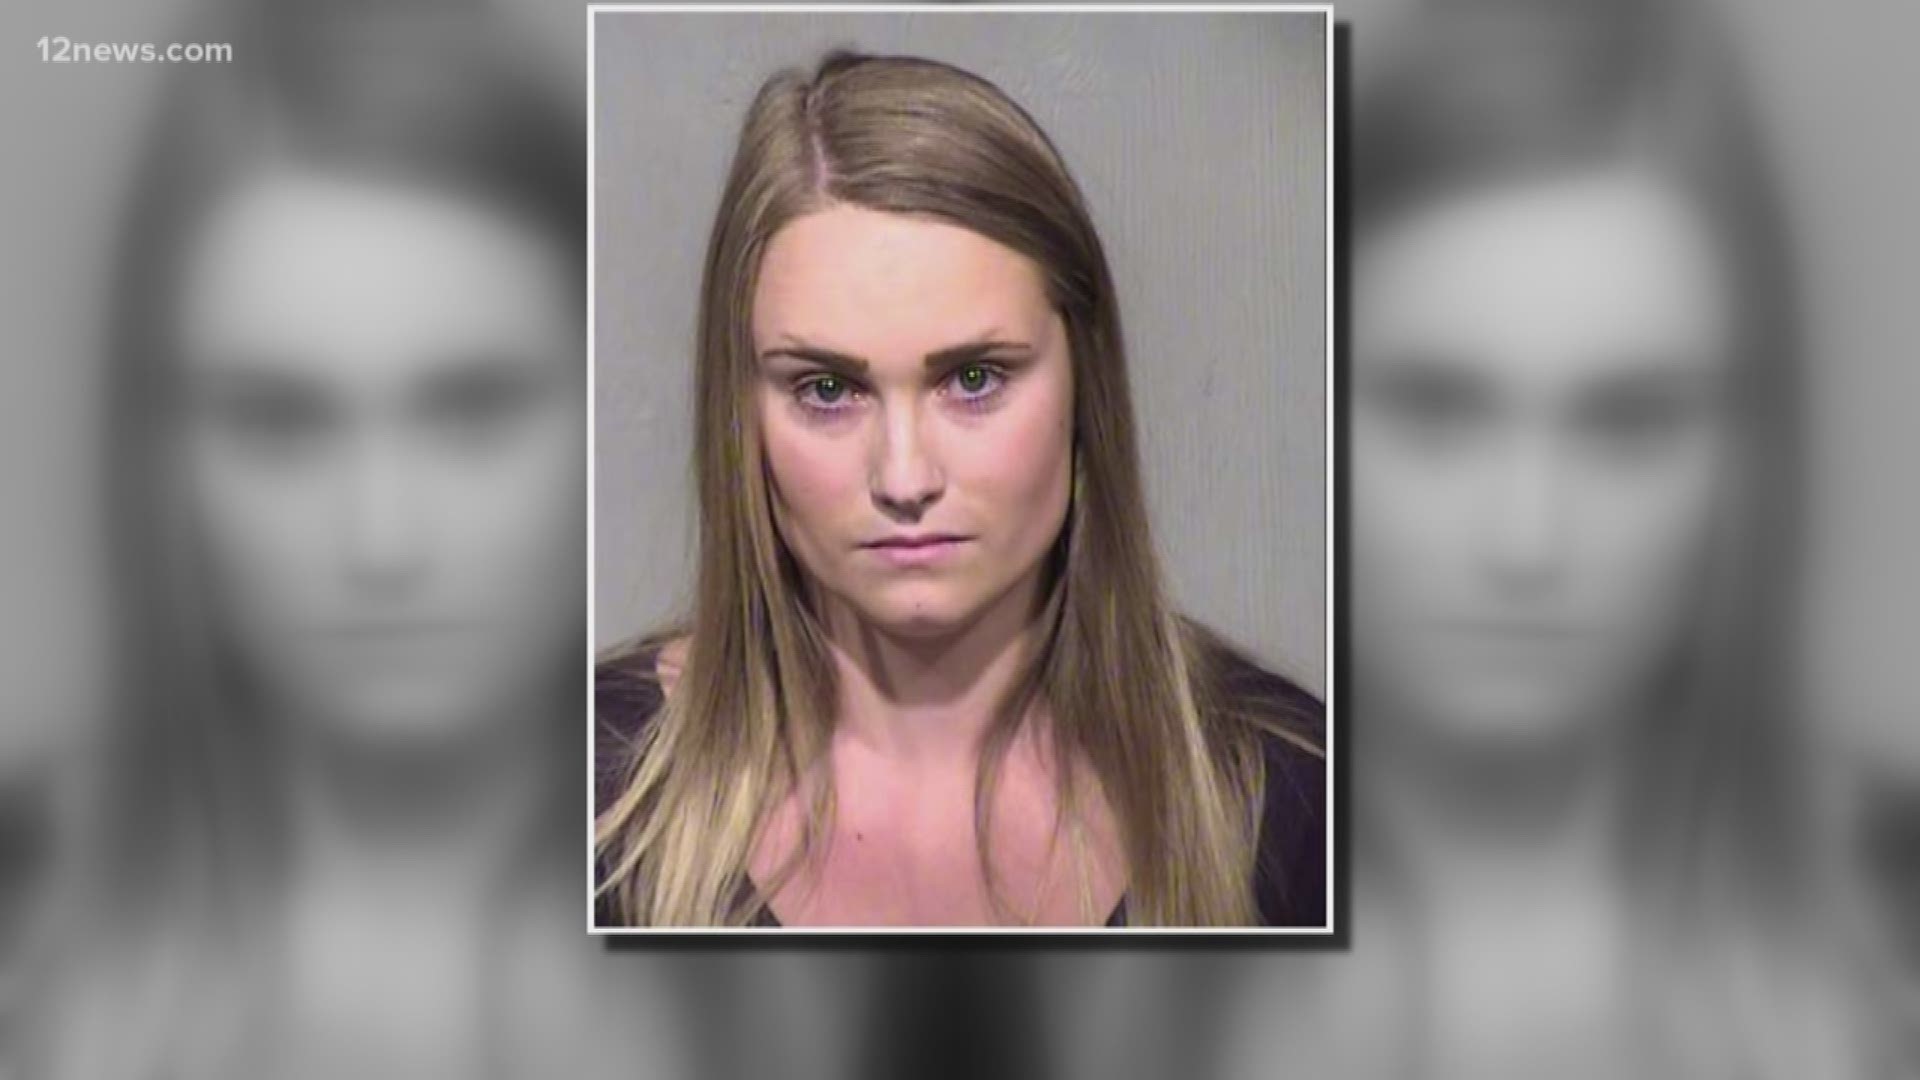 Police say 21-year-old Kassidy Woodworth, a student at Grand Canyon University, is accused of stealing thousands of dollars worth property from families she worked for. One Valley mom speaks out about items that Woodworth may have taken from her home.